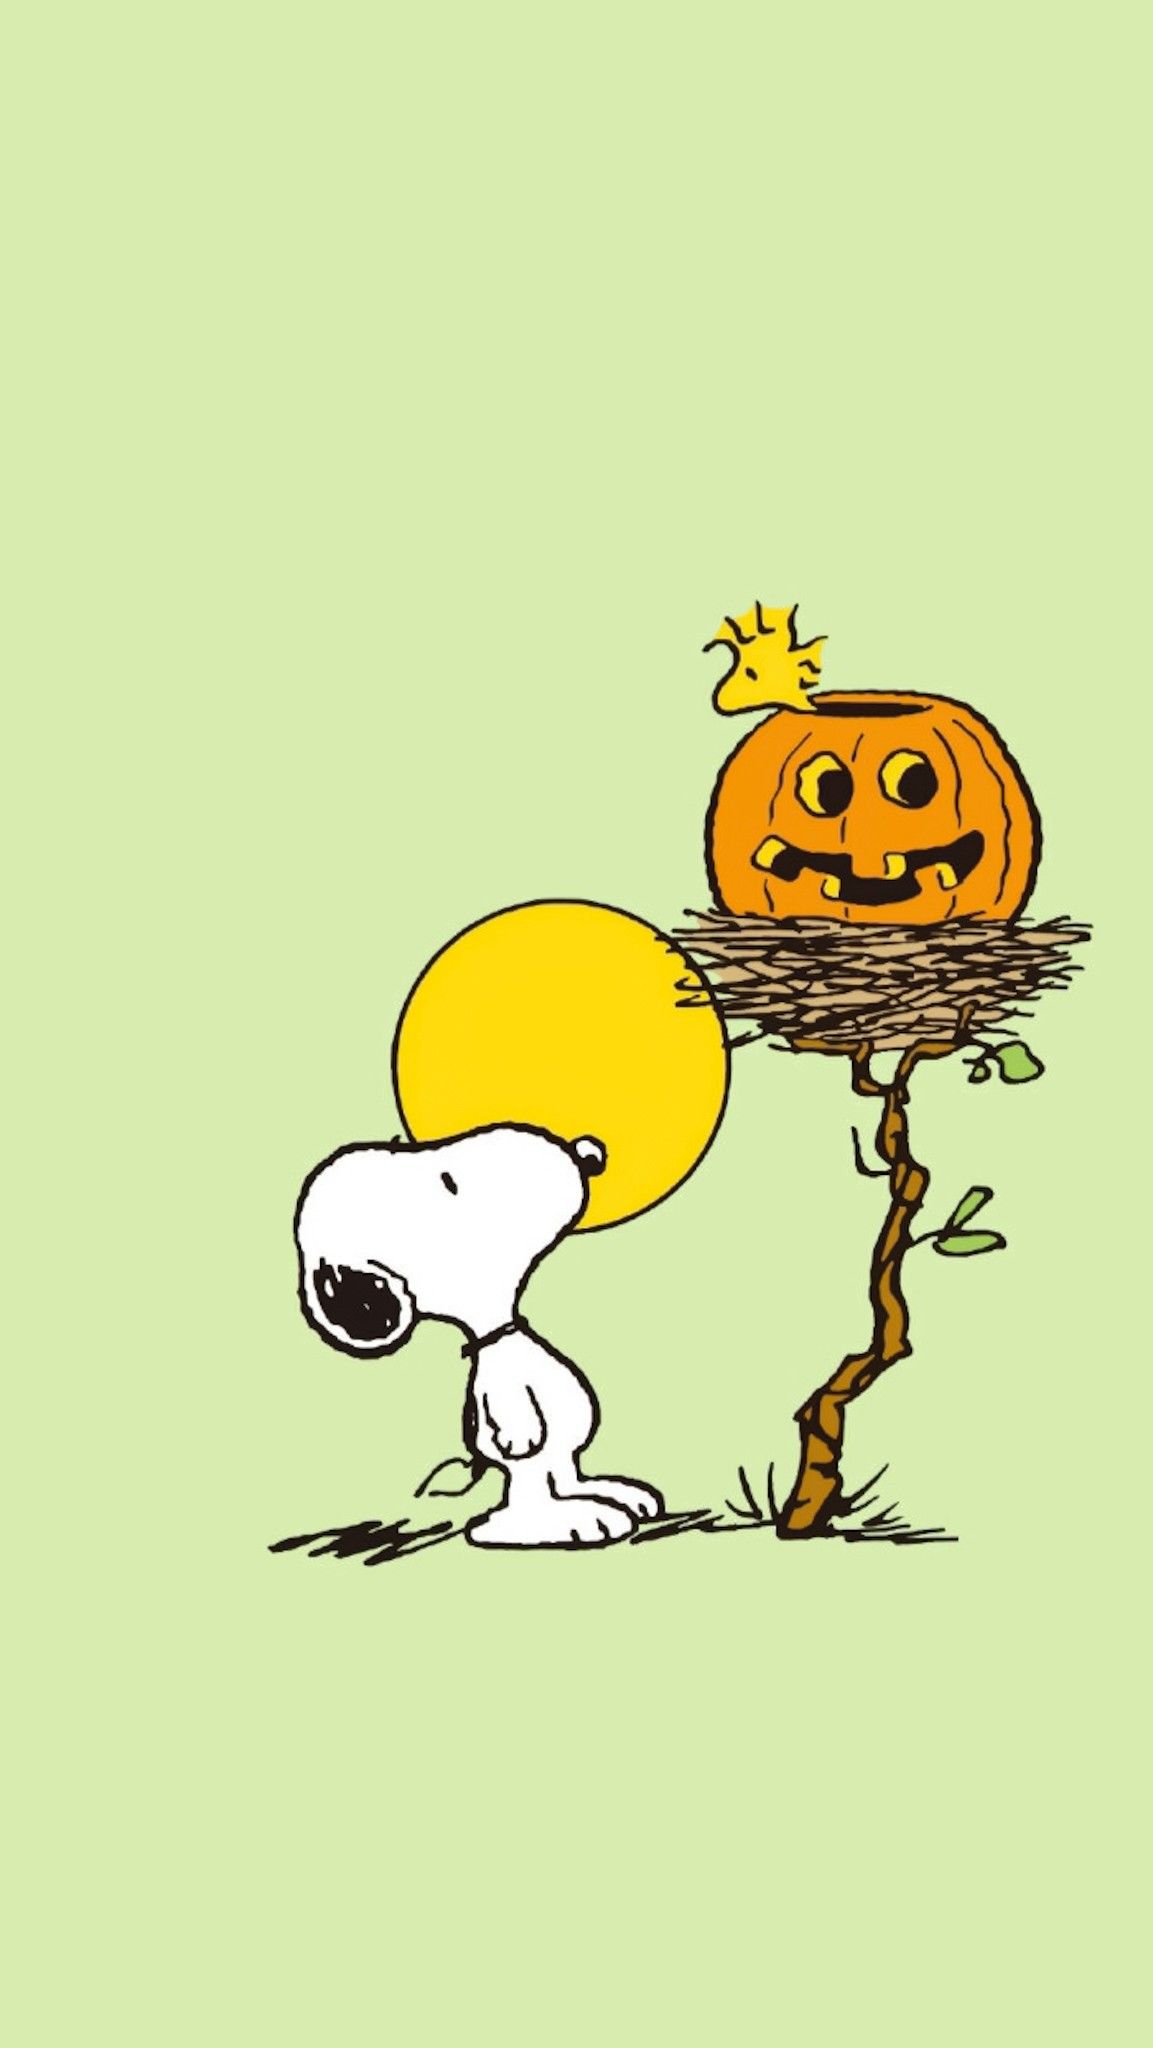 Pin by alisa on snoopy snoopy wallpaper snoopy halloween snoopy